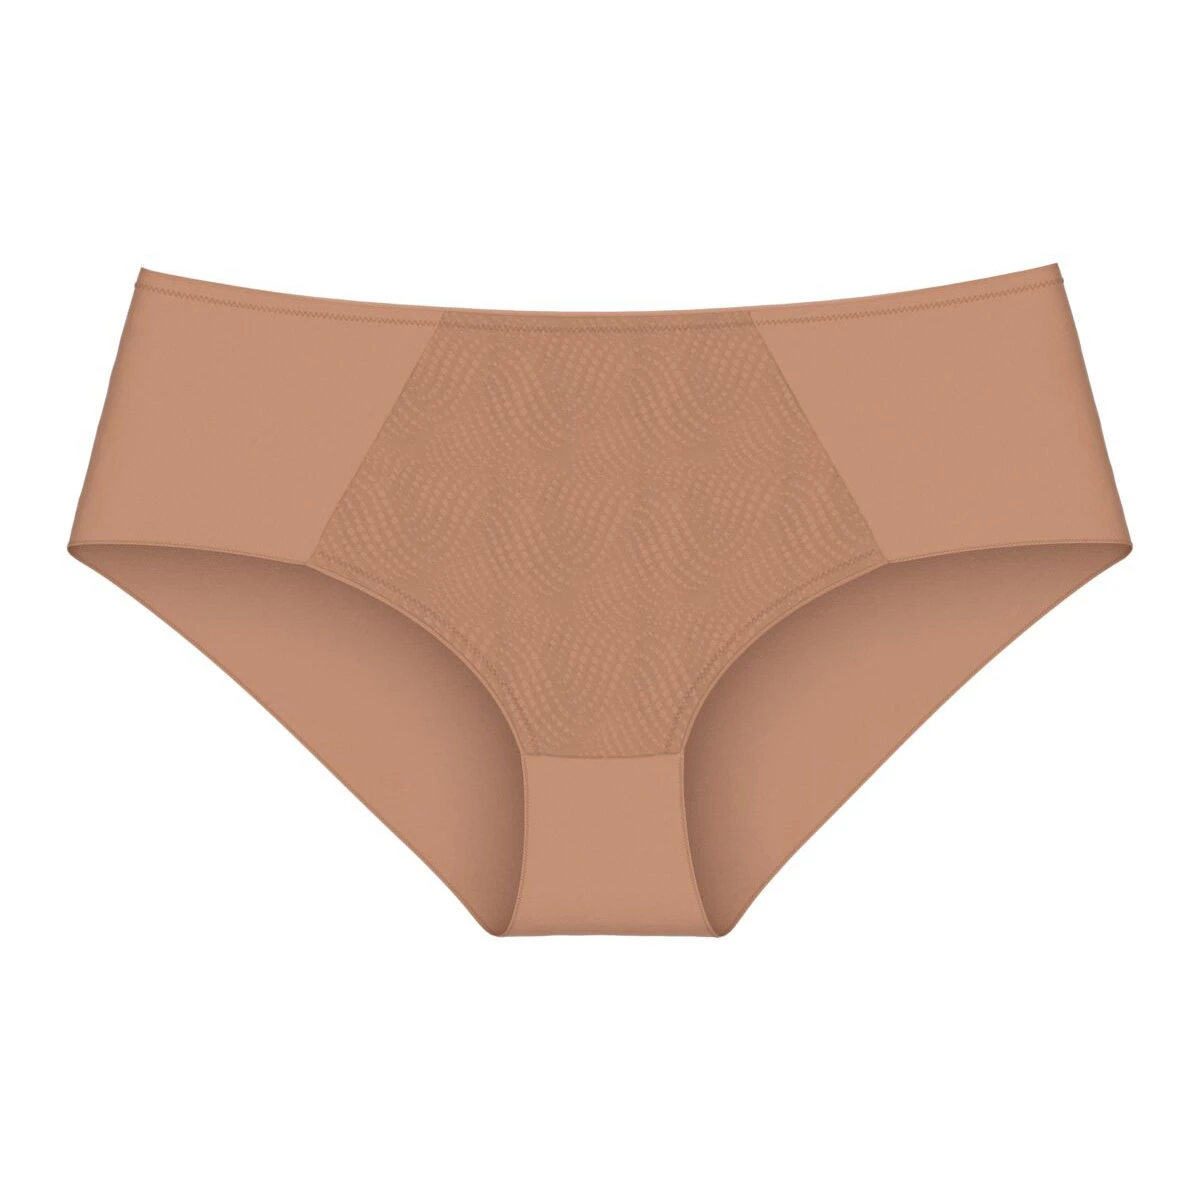 Buy Triumph Mid Rise Chafefree Hipster Panty - Toasted Almond at